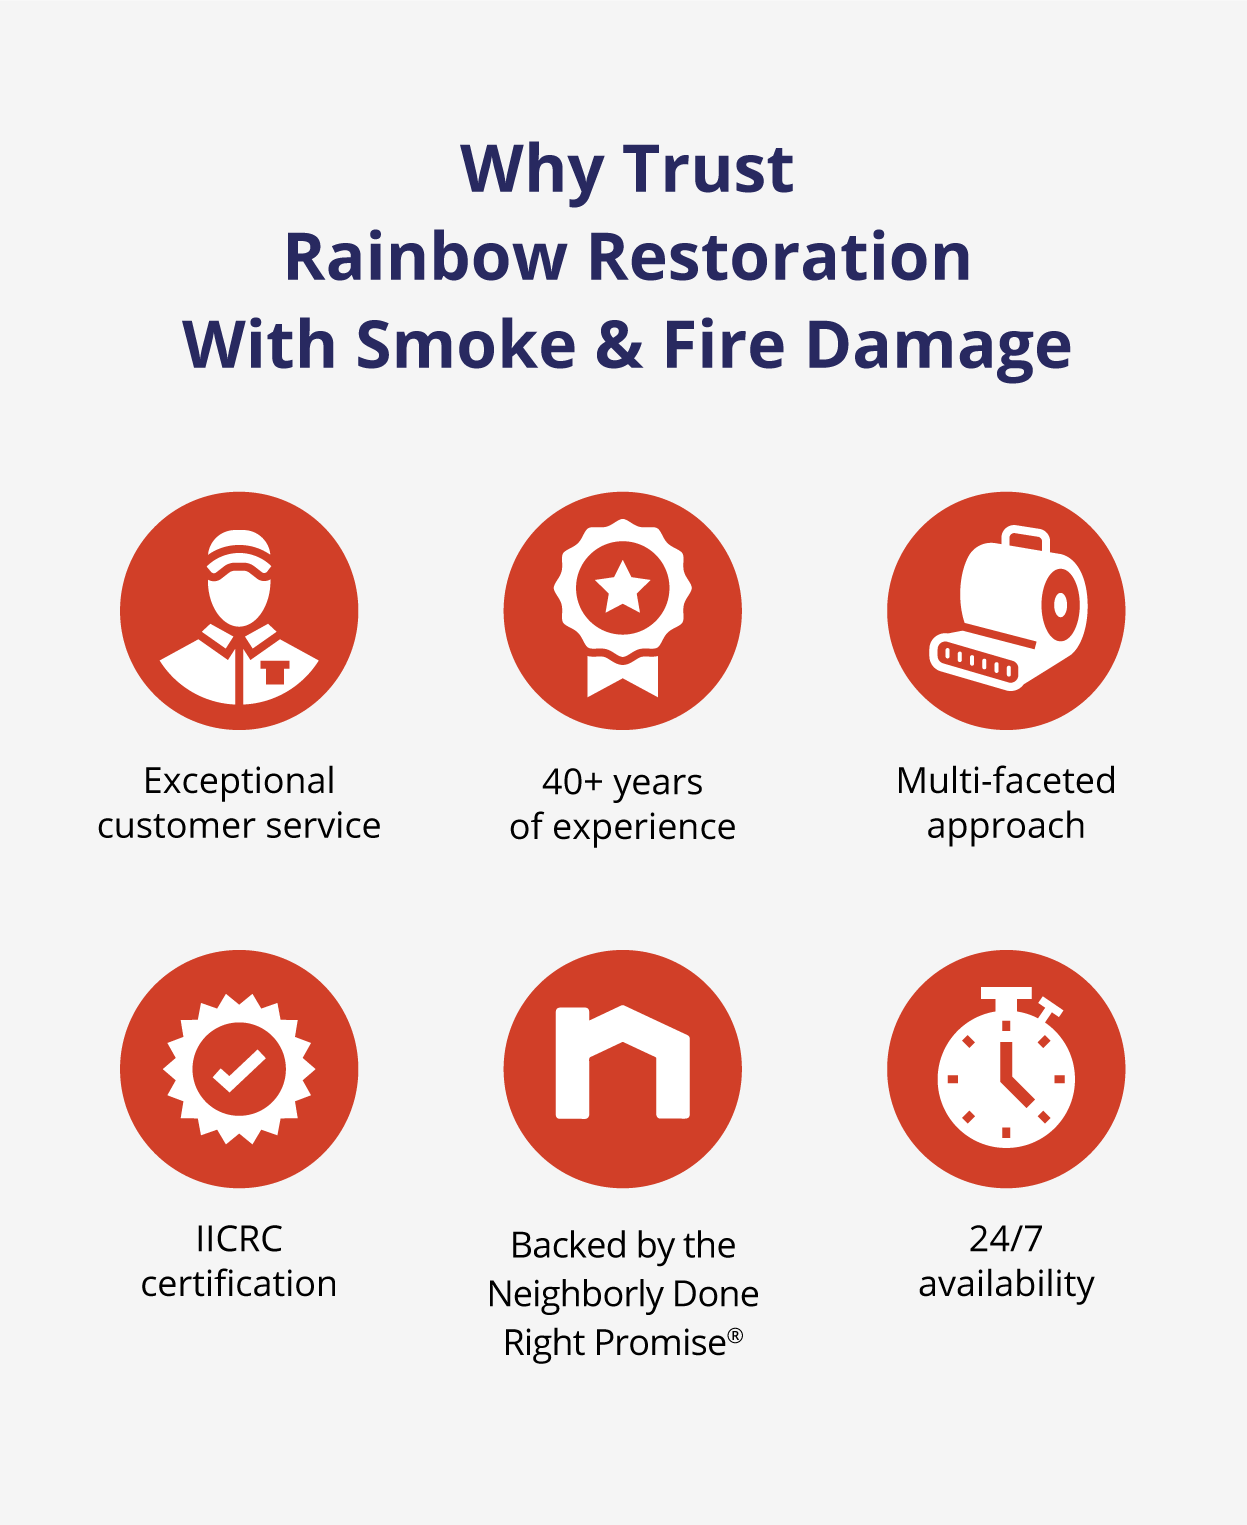 Six reasons to trust Rainbow Restoration for smoke and fire damage repair services with illustrative icons.